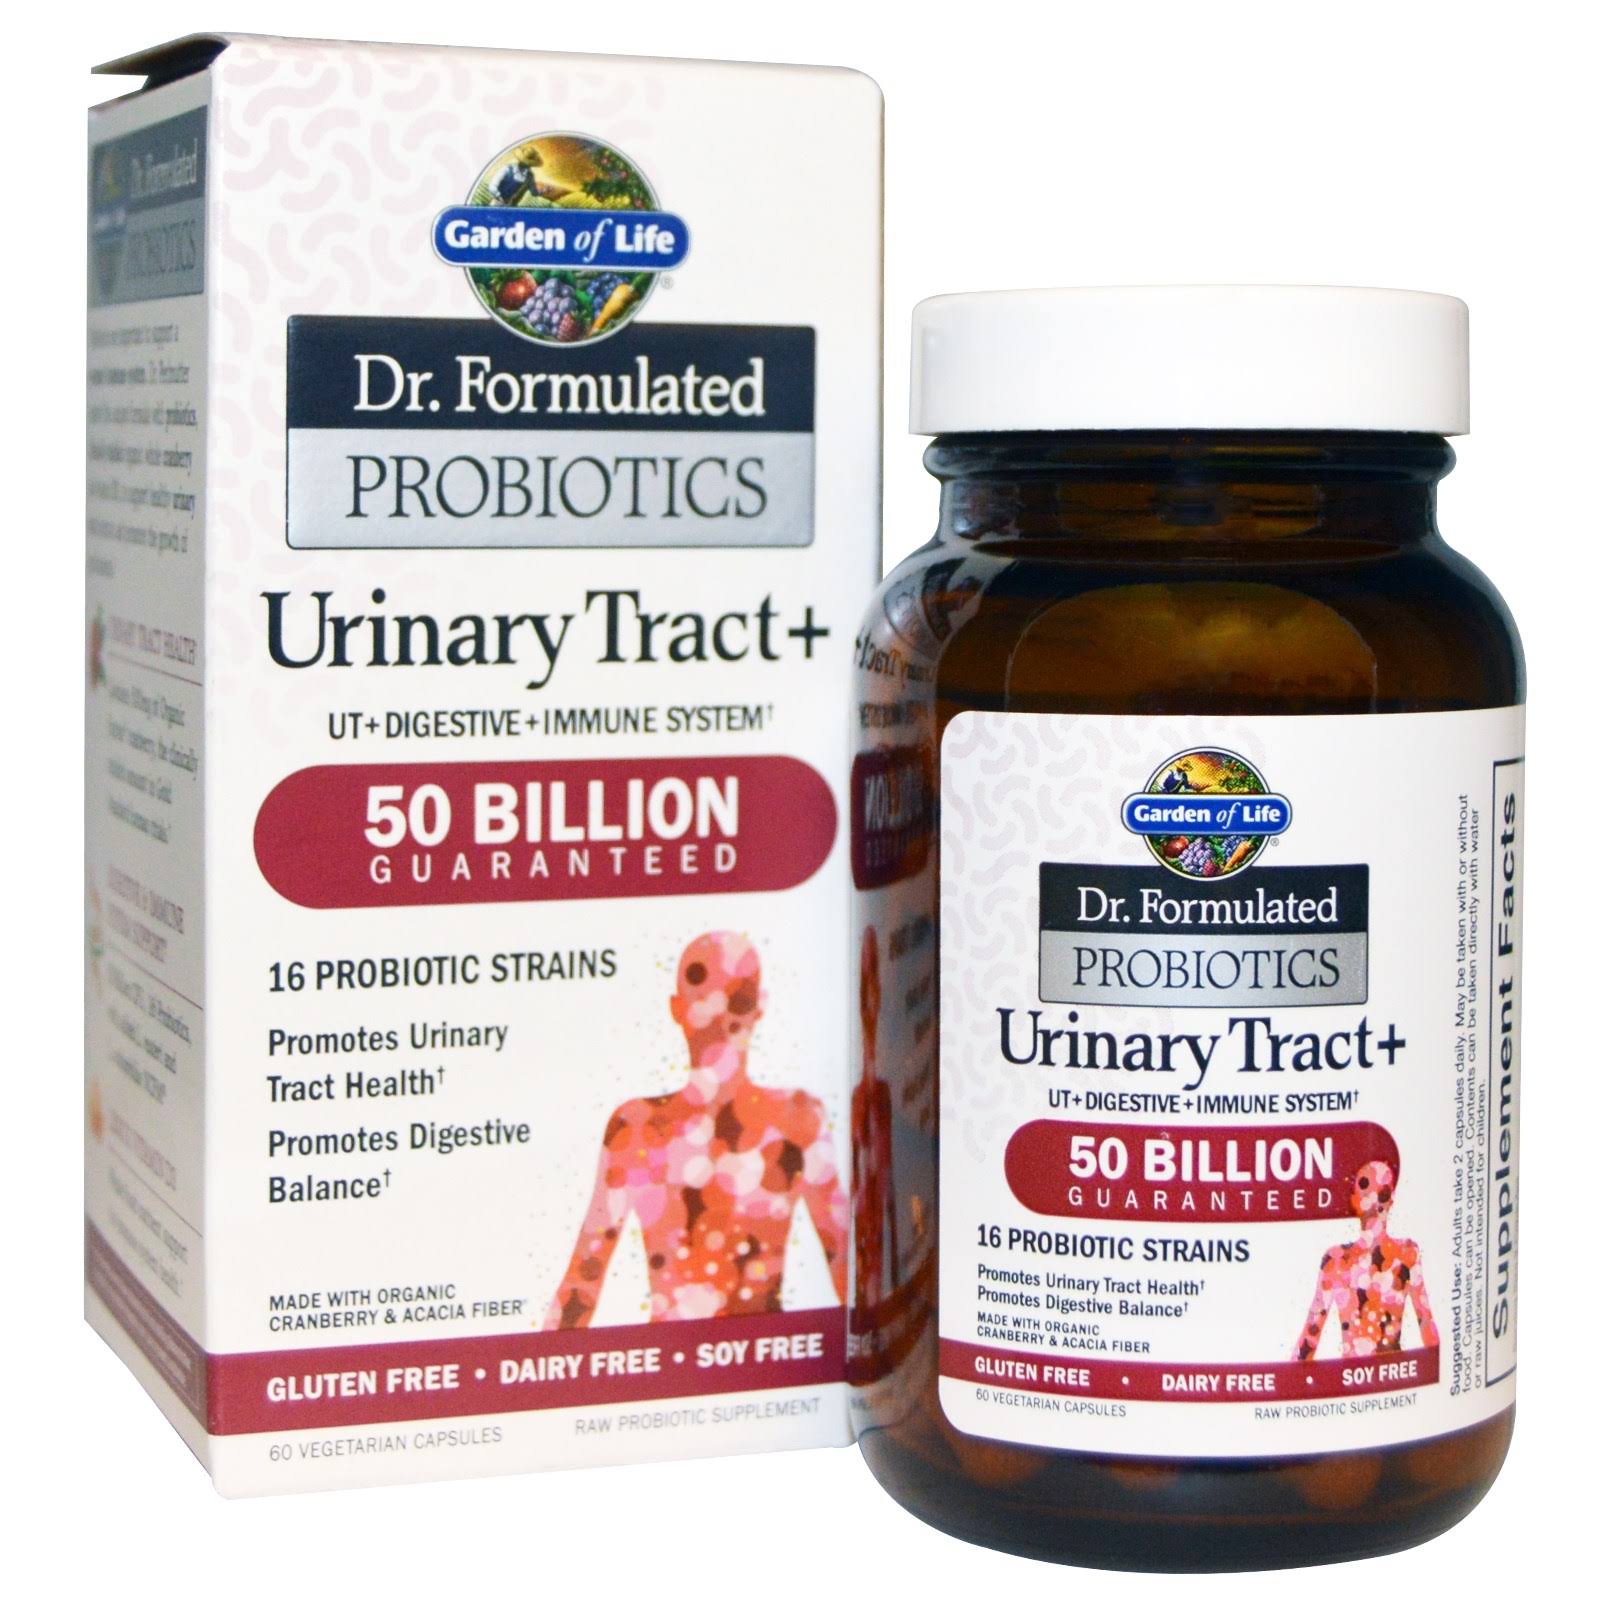 Garden of Life Dr. Formulated Probiotics Urinary Tract Plus